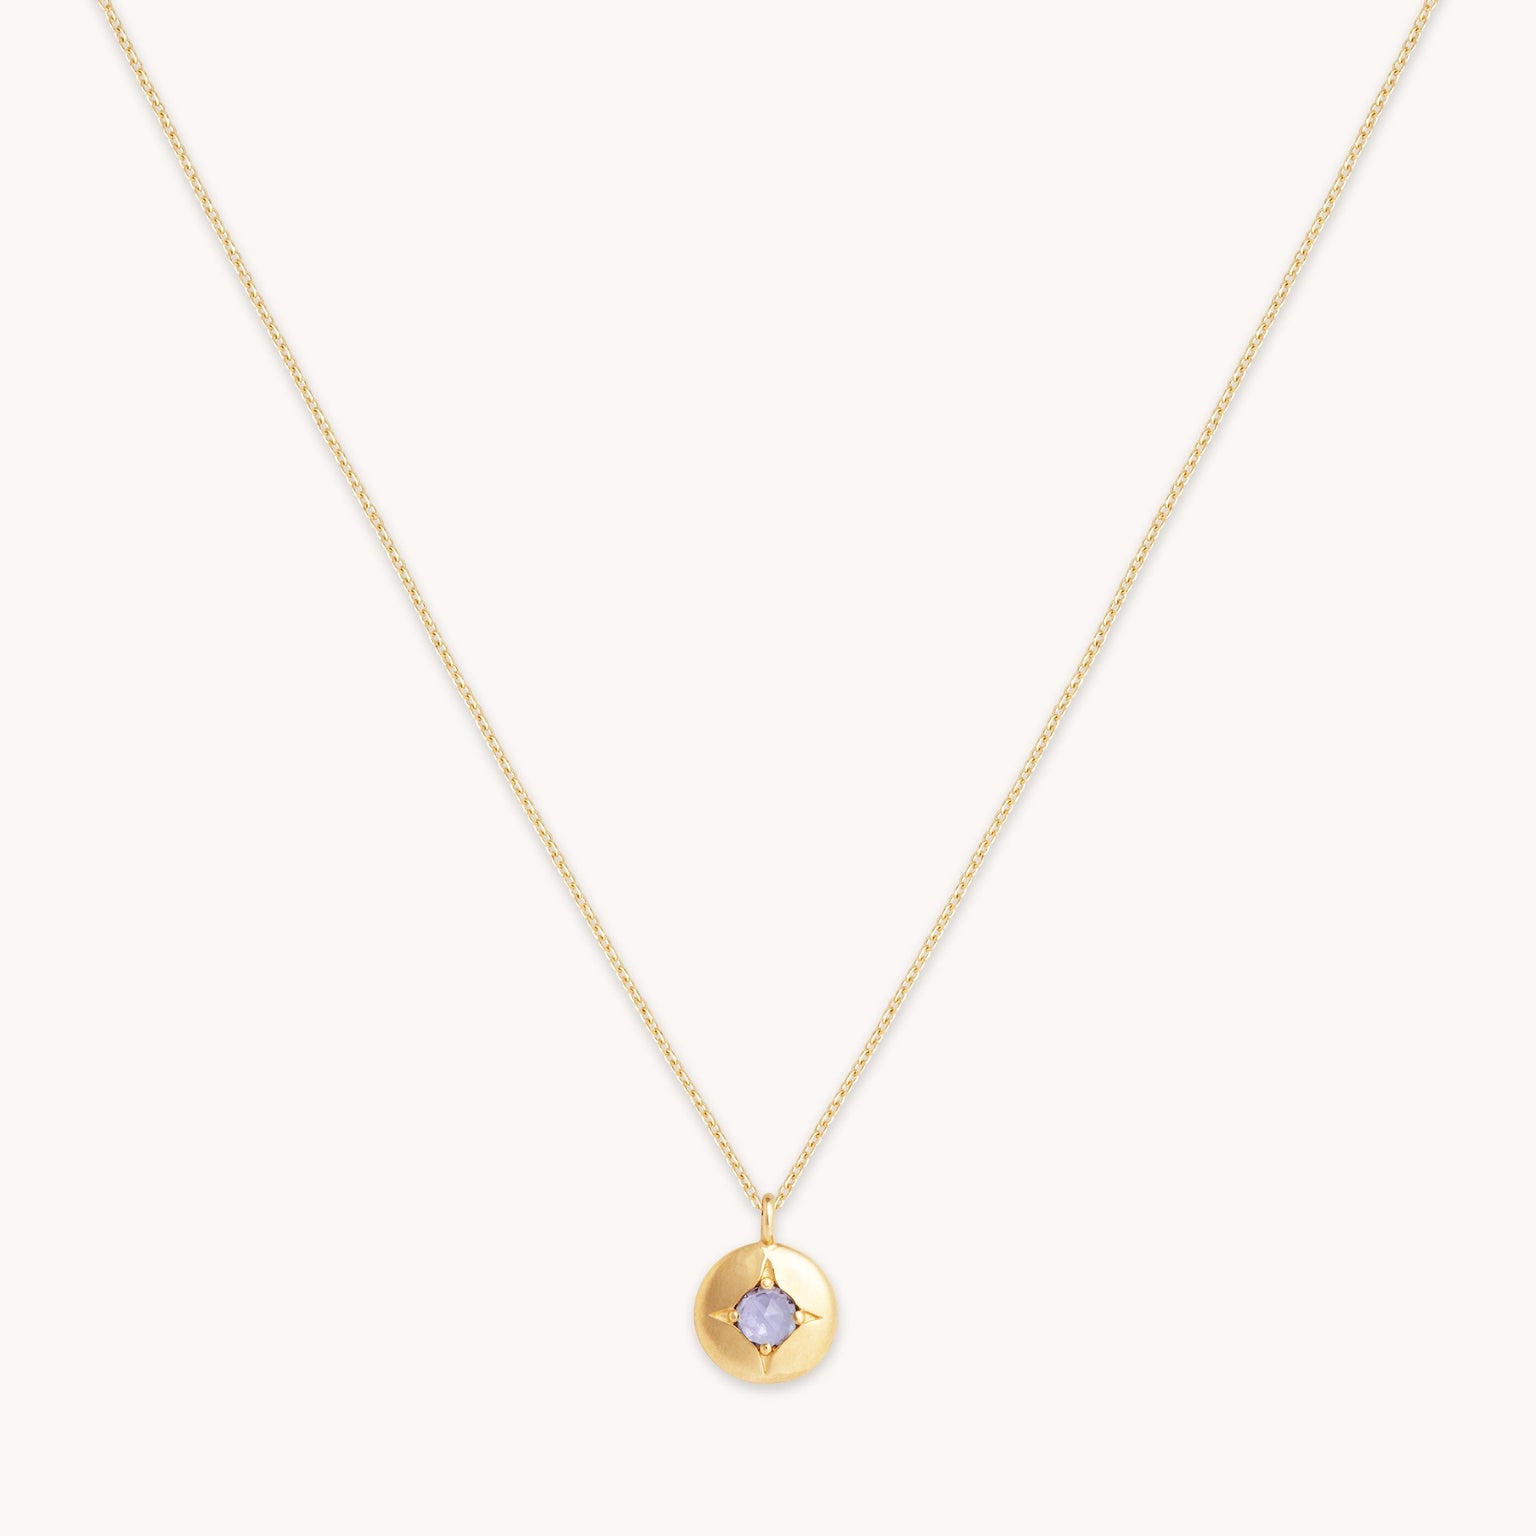 December Birthstone Necklace in Solid Gold